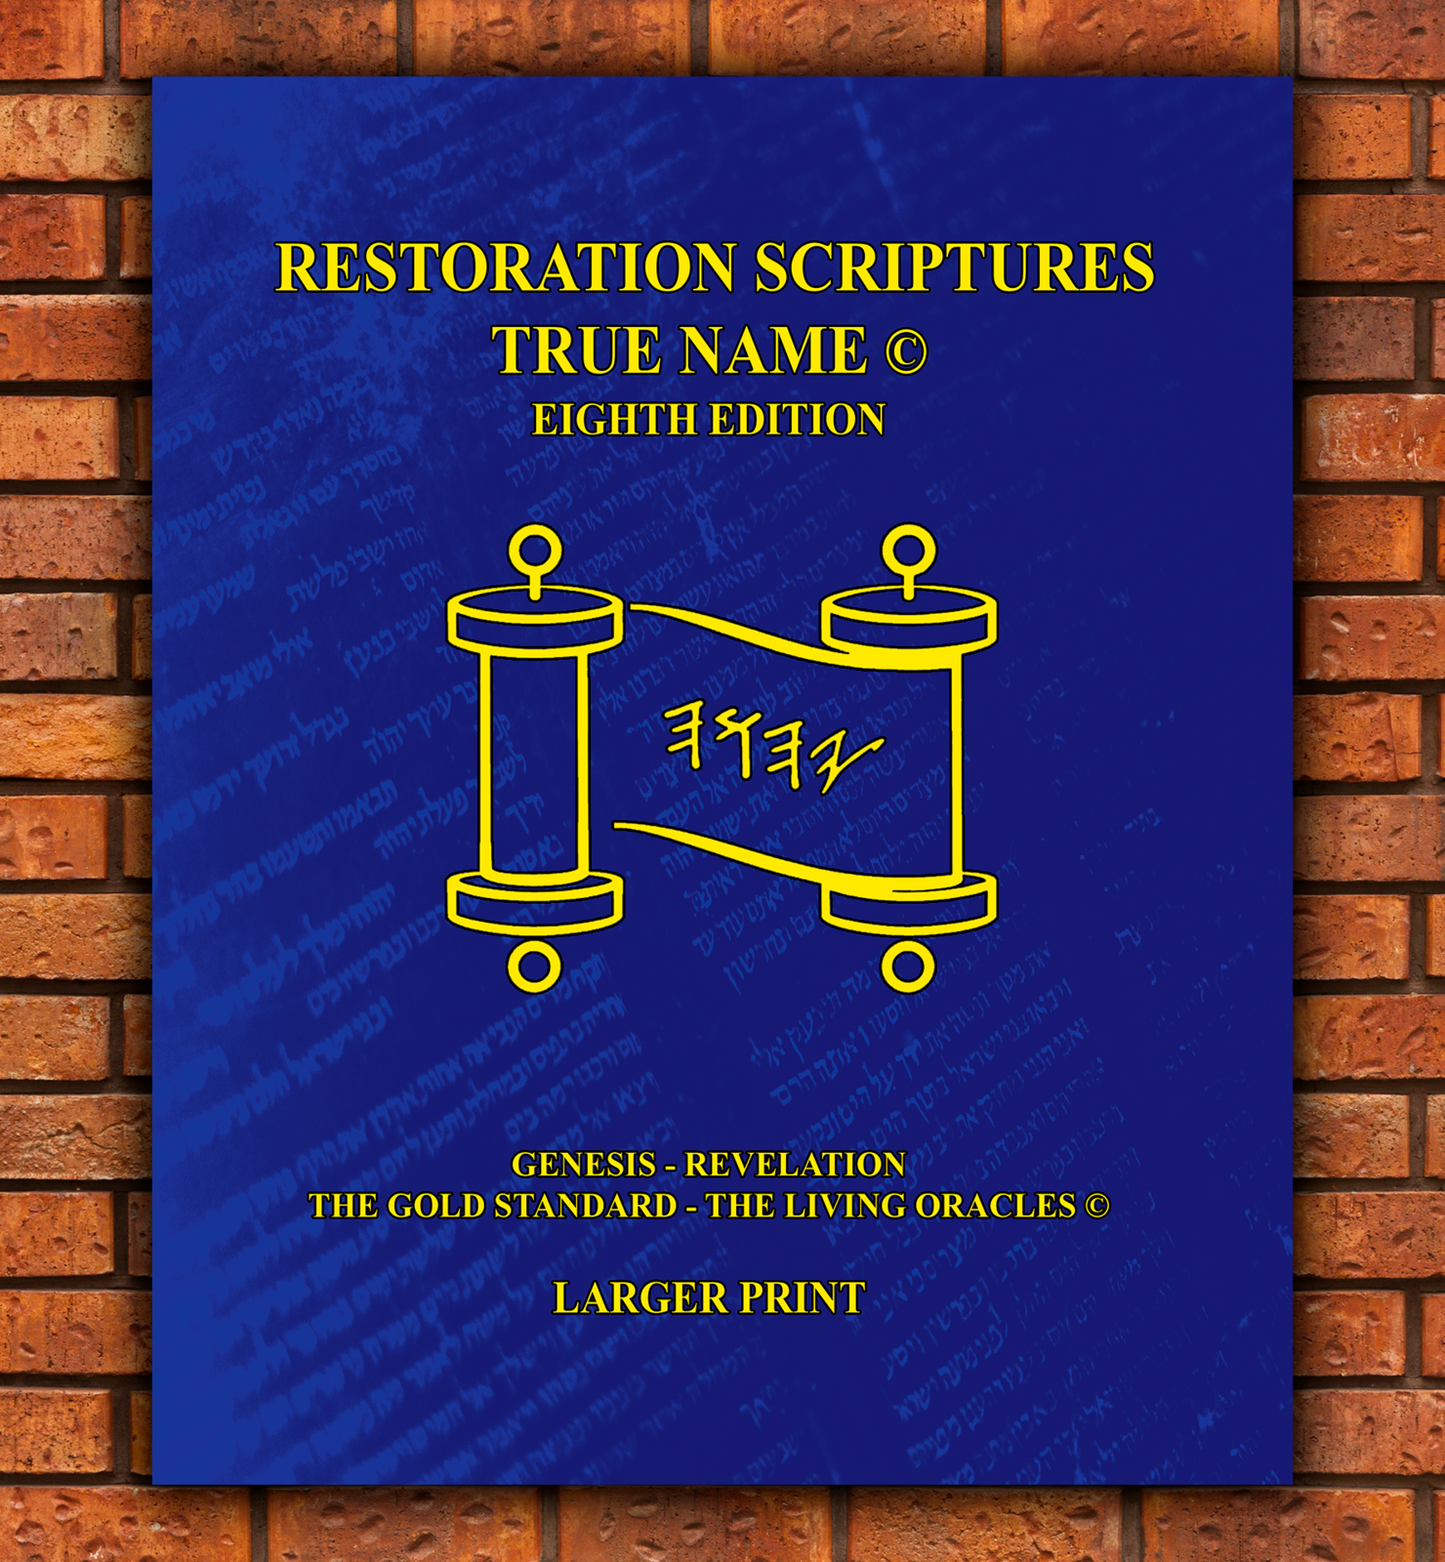 The Three Treasures Pack The Restoration Scriptures True Name Eighth Larger Print Edition - Genesis-Revelation + RSTNE Apocrypha + Study Guide